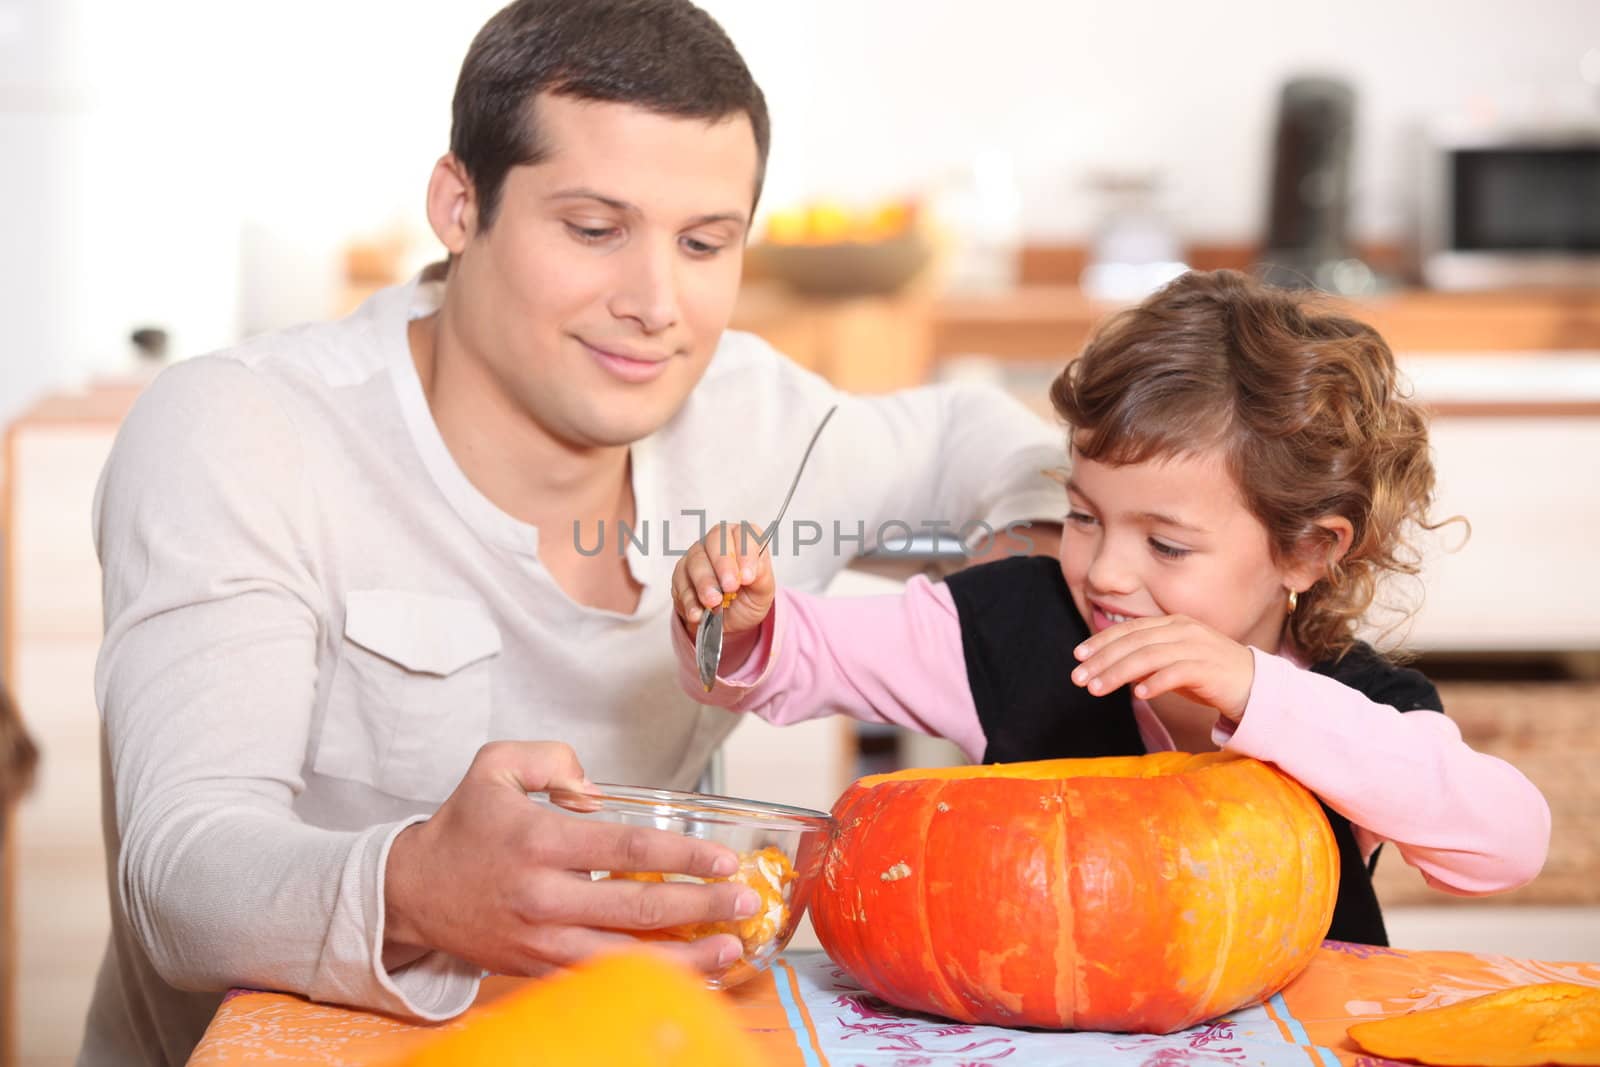 Dad and daughter hollowing out a pumpkin by phovoir